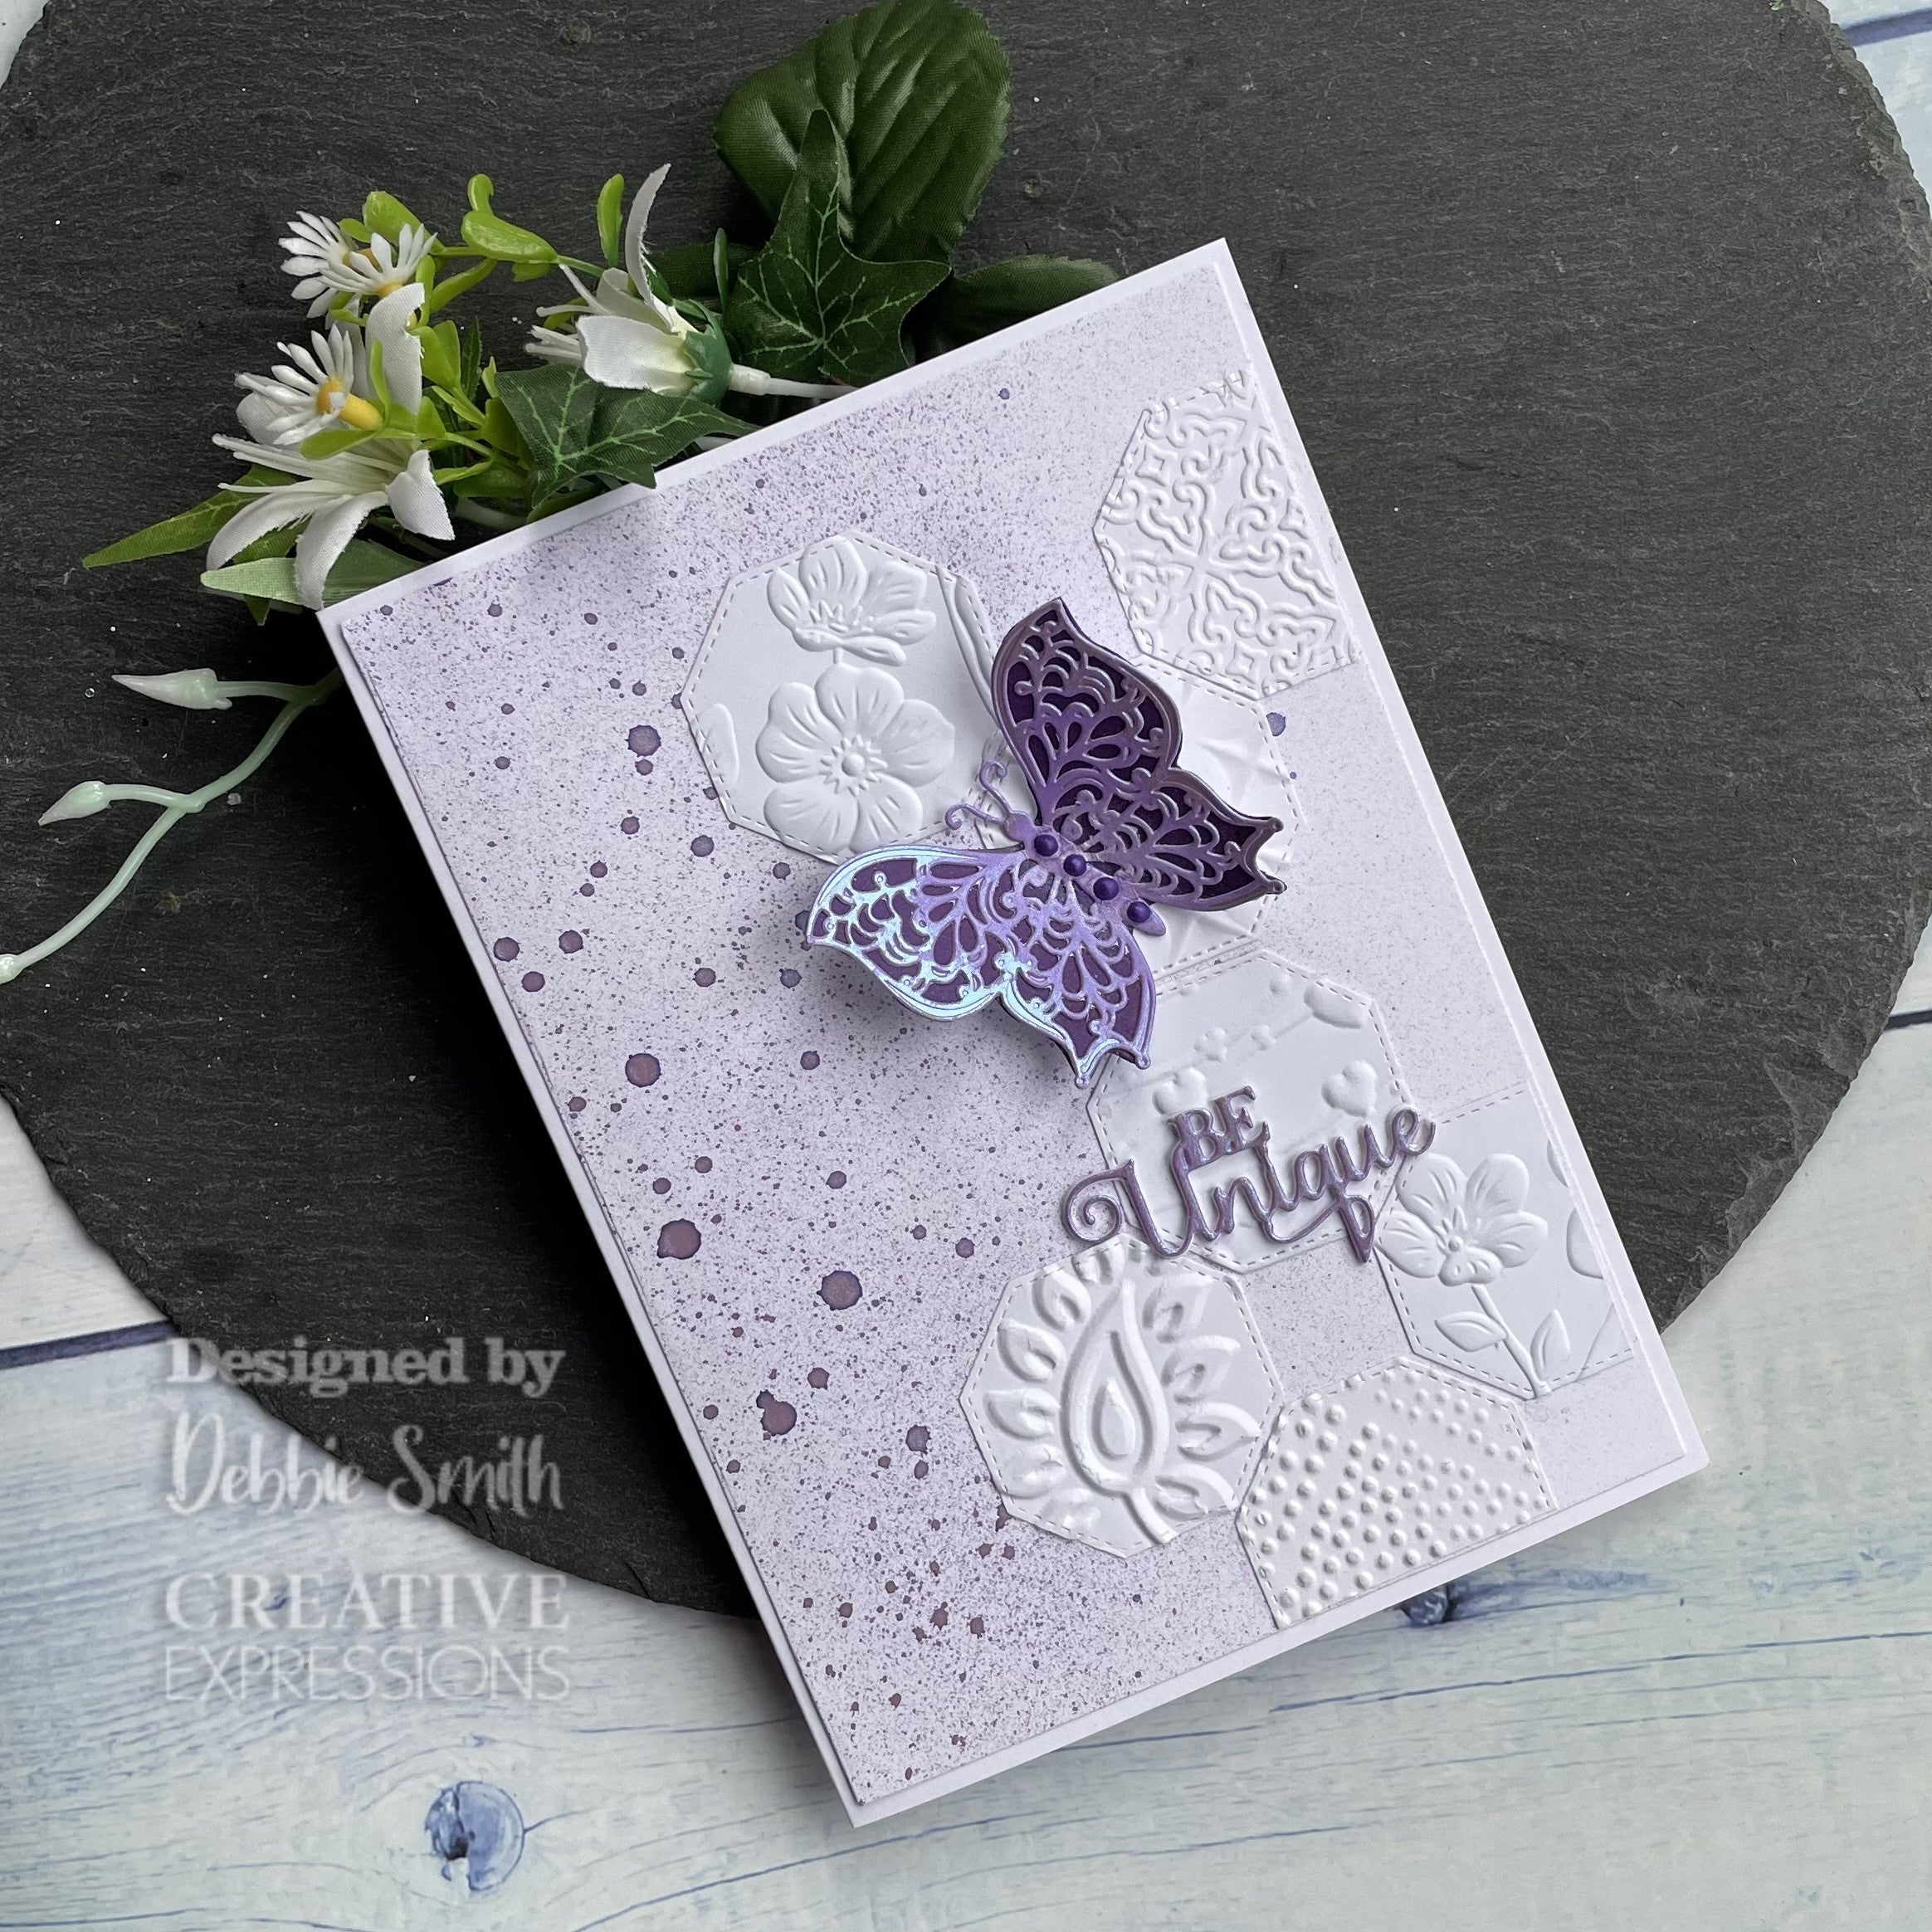 Creative Expressions Jamie Rodgers Grand Butterfly Craft Die